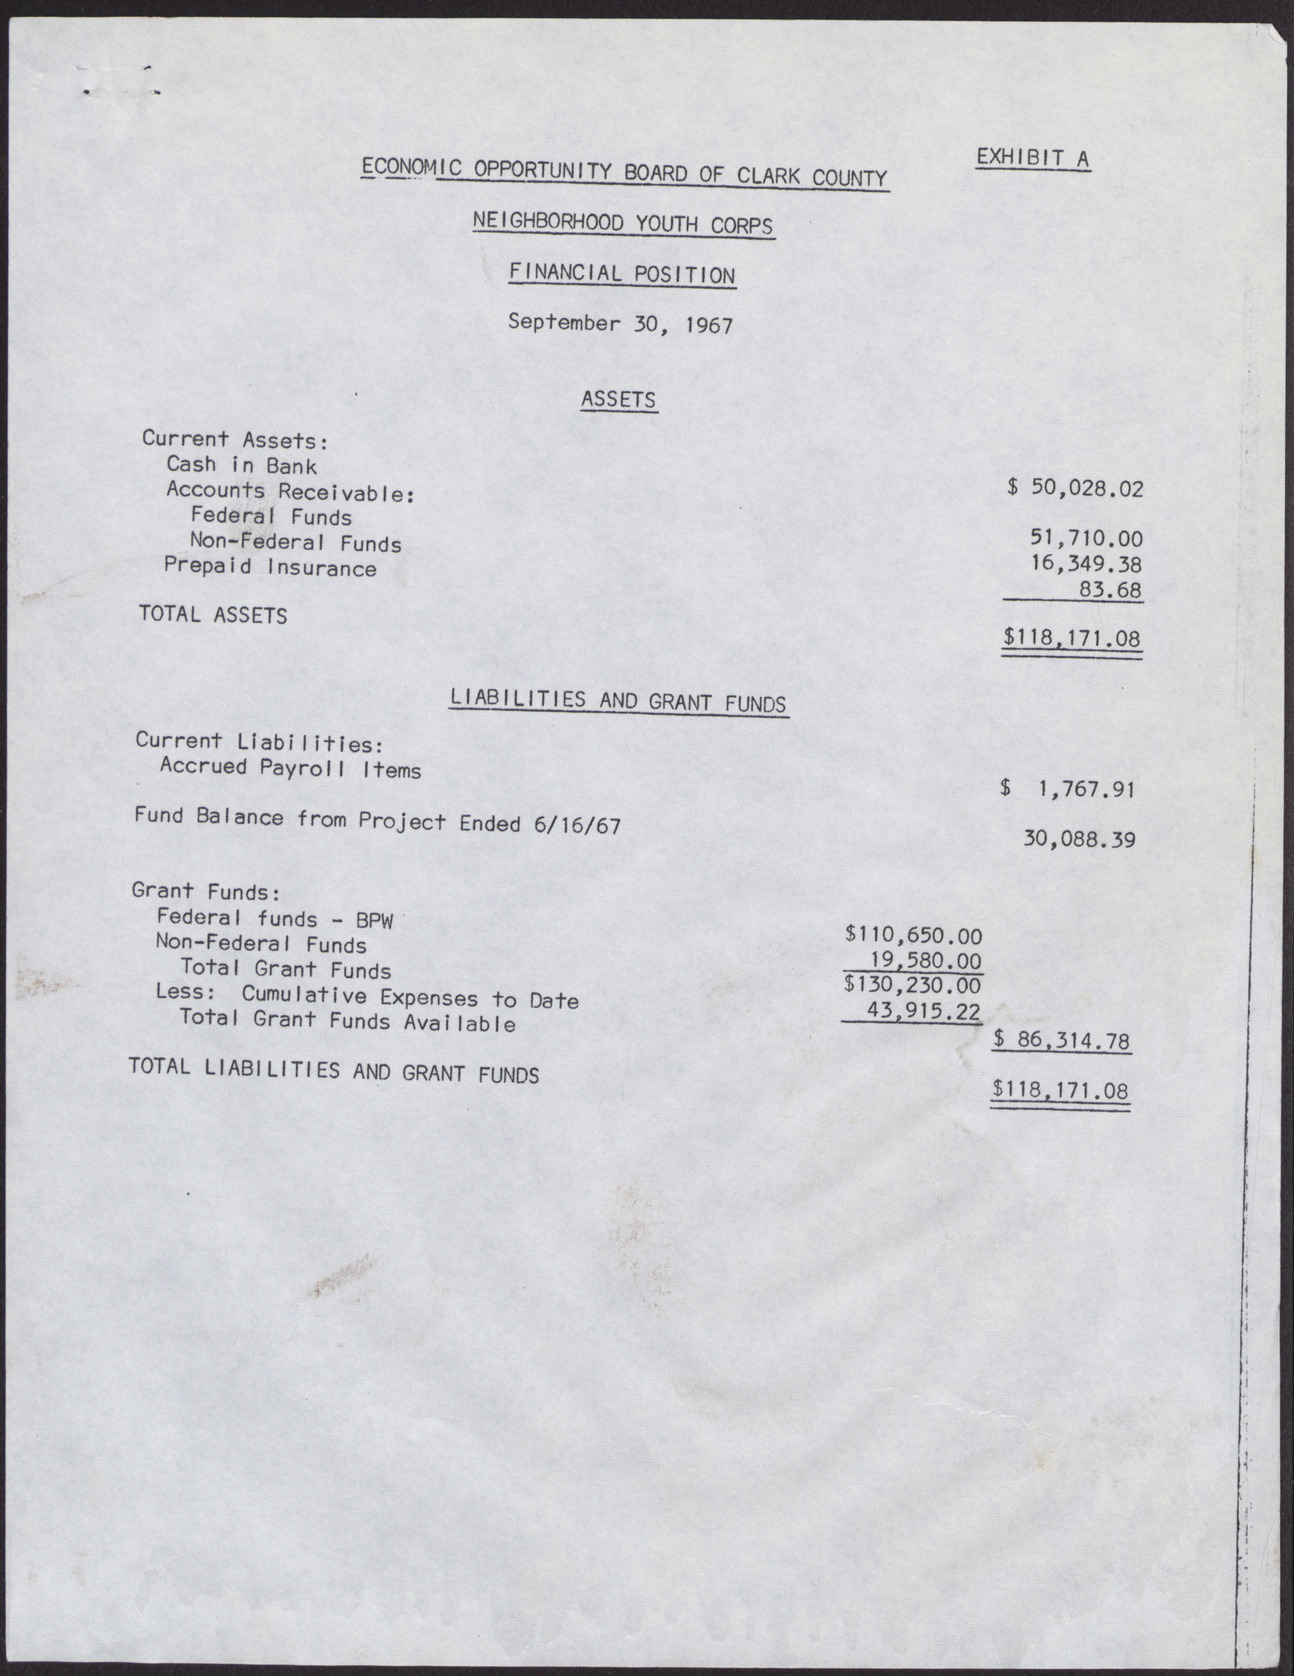 Economic Opportunity Board of Clark County Neighborhood Youth Corps Financial Position, Statement of Budgeted and Actual Expenditures, Schedule of Checks Written (3 pages), September 1967